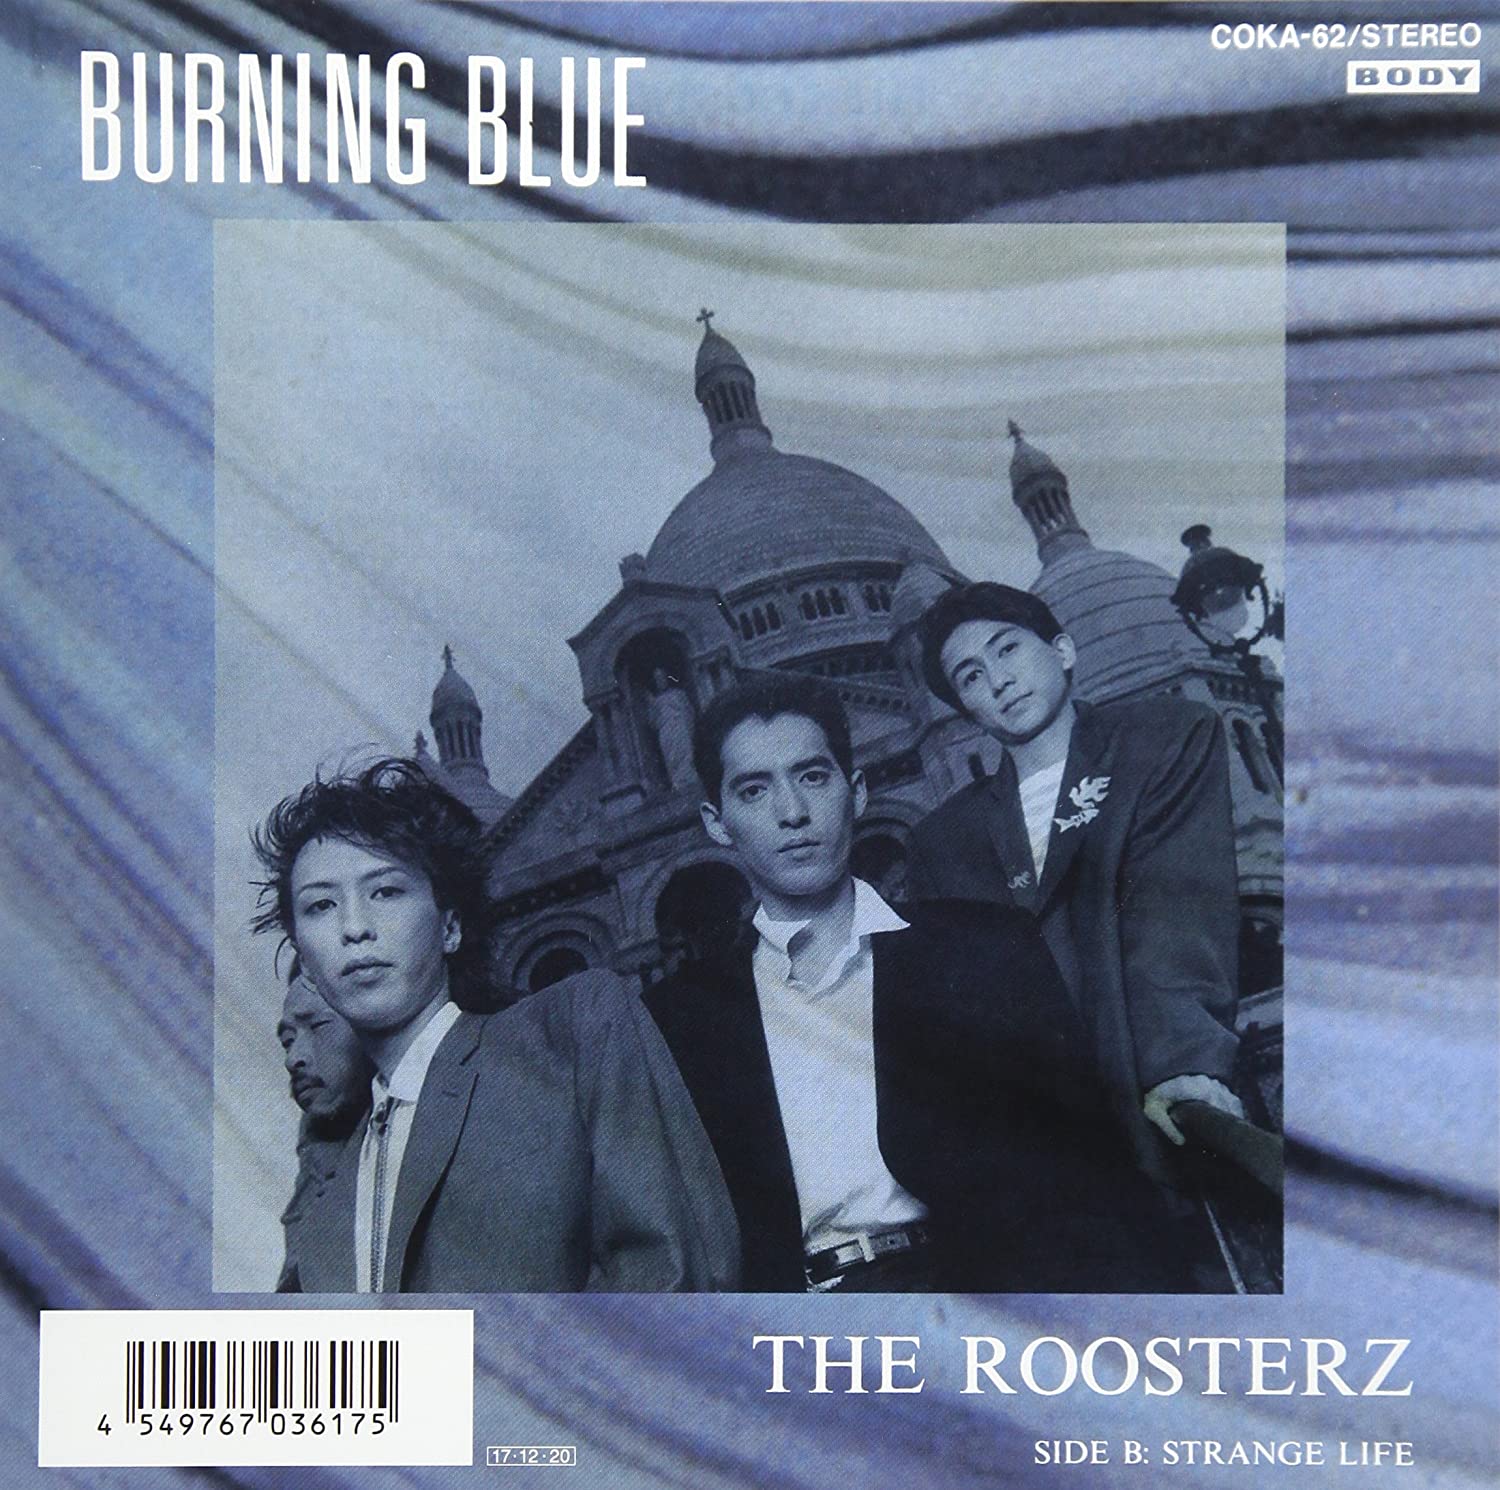 ROOSTERS, THE (ザ・ルースターズ) - Burning Blue / Strange Life (Japan Reissue 7